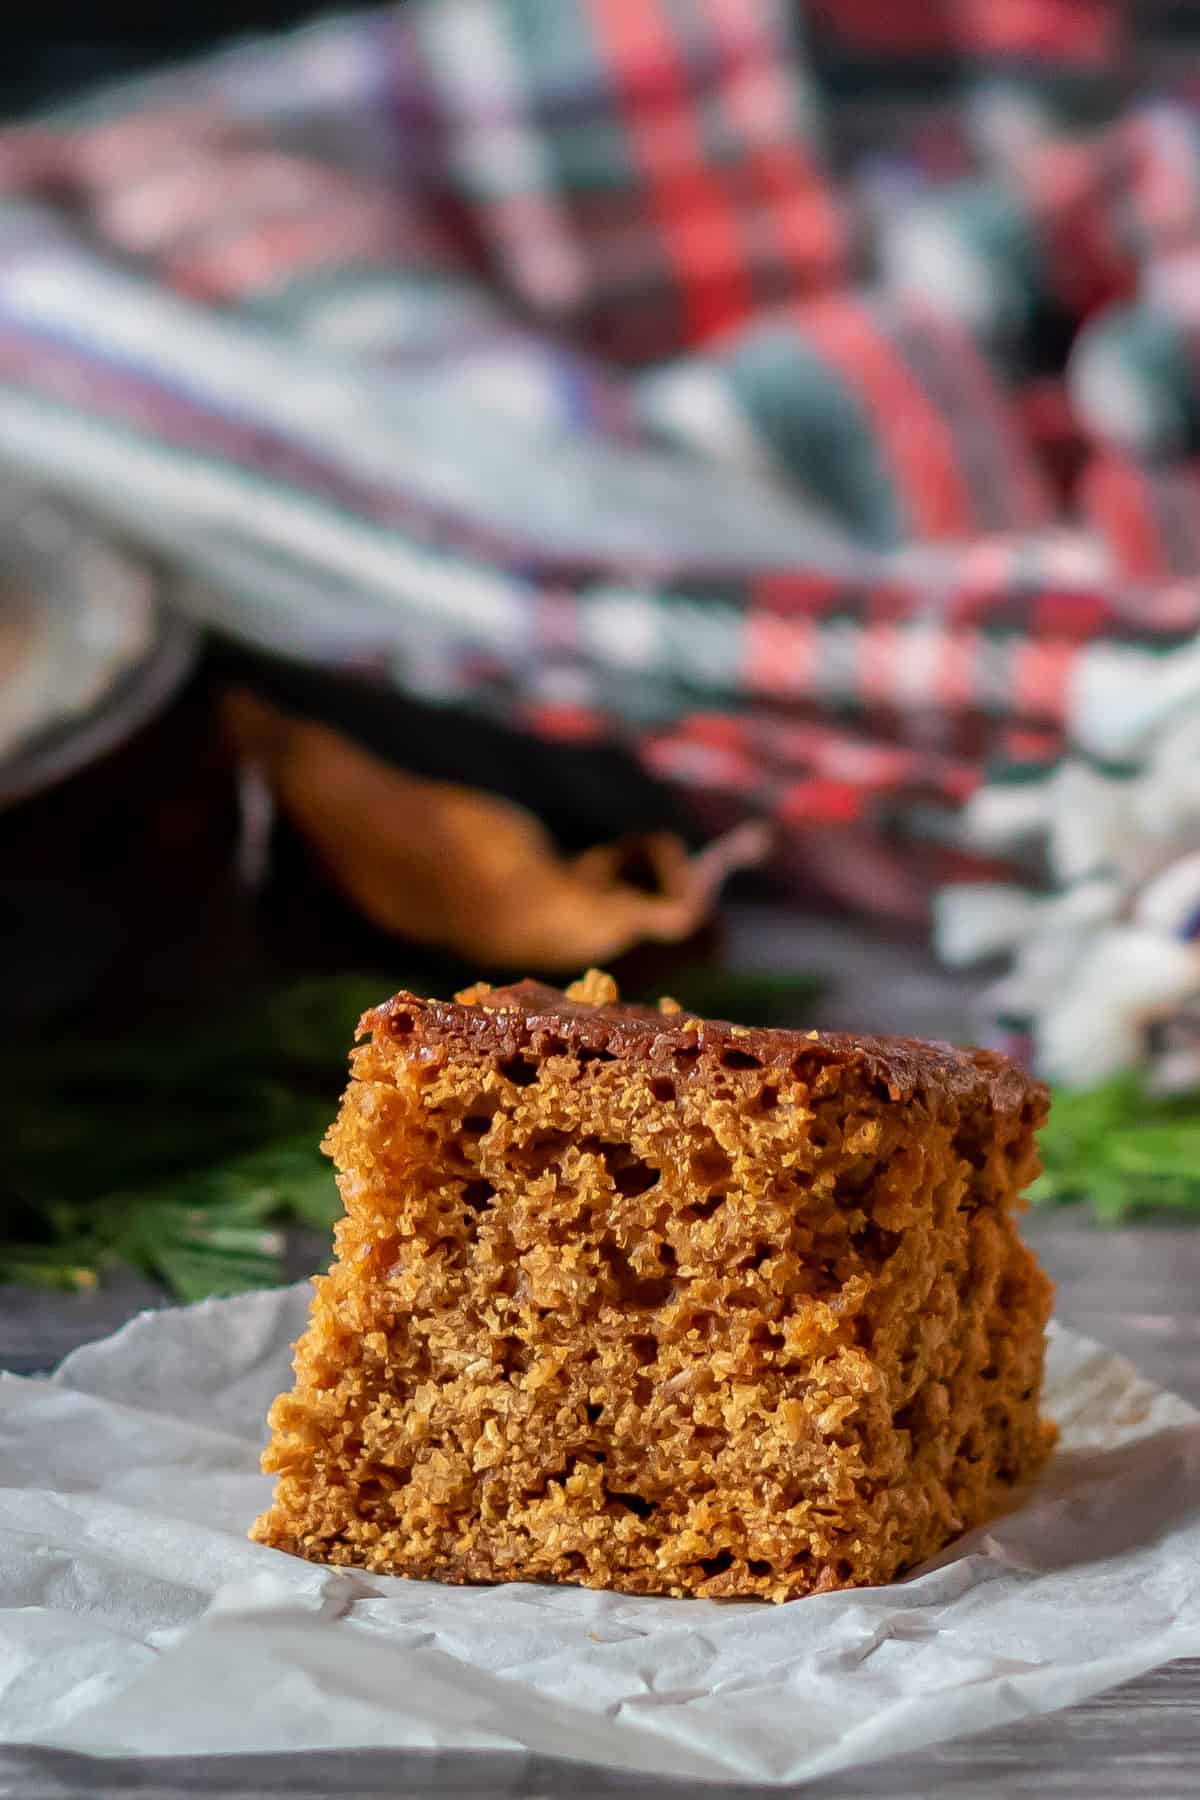 Side view of a slice of parkin cake.